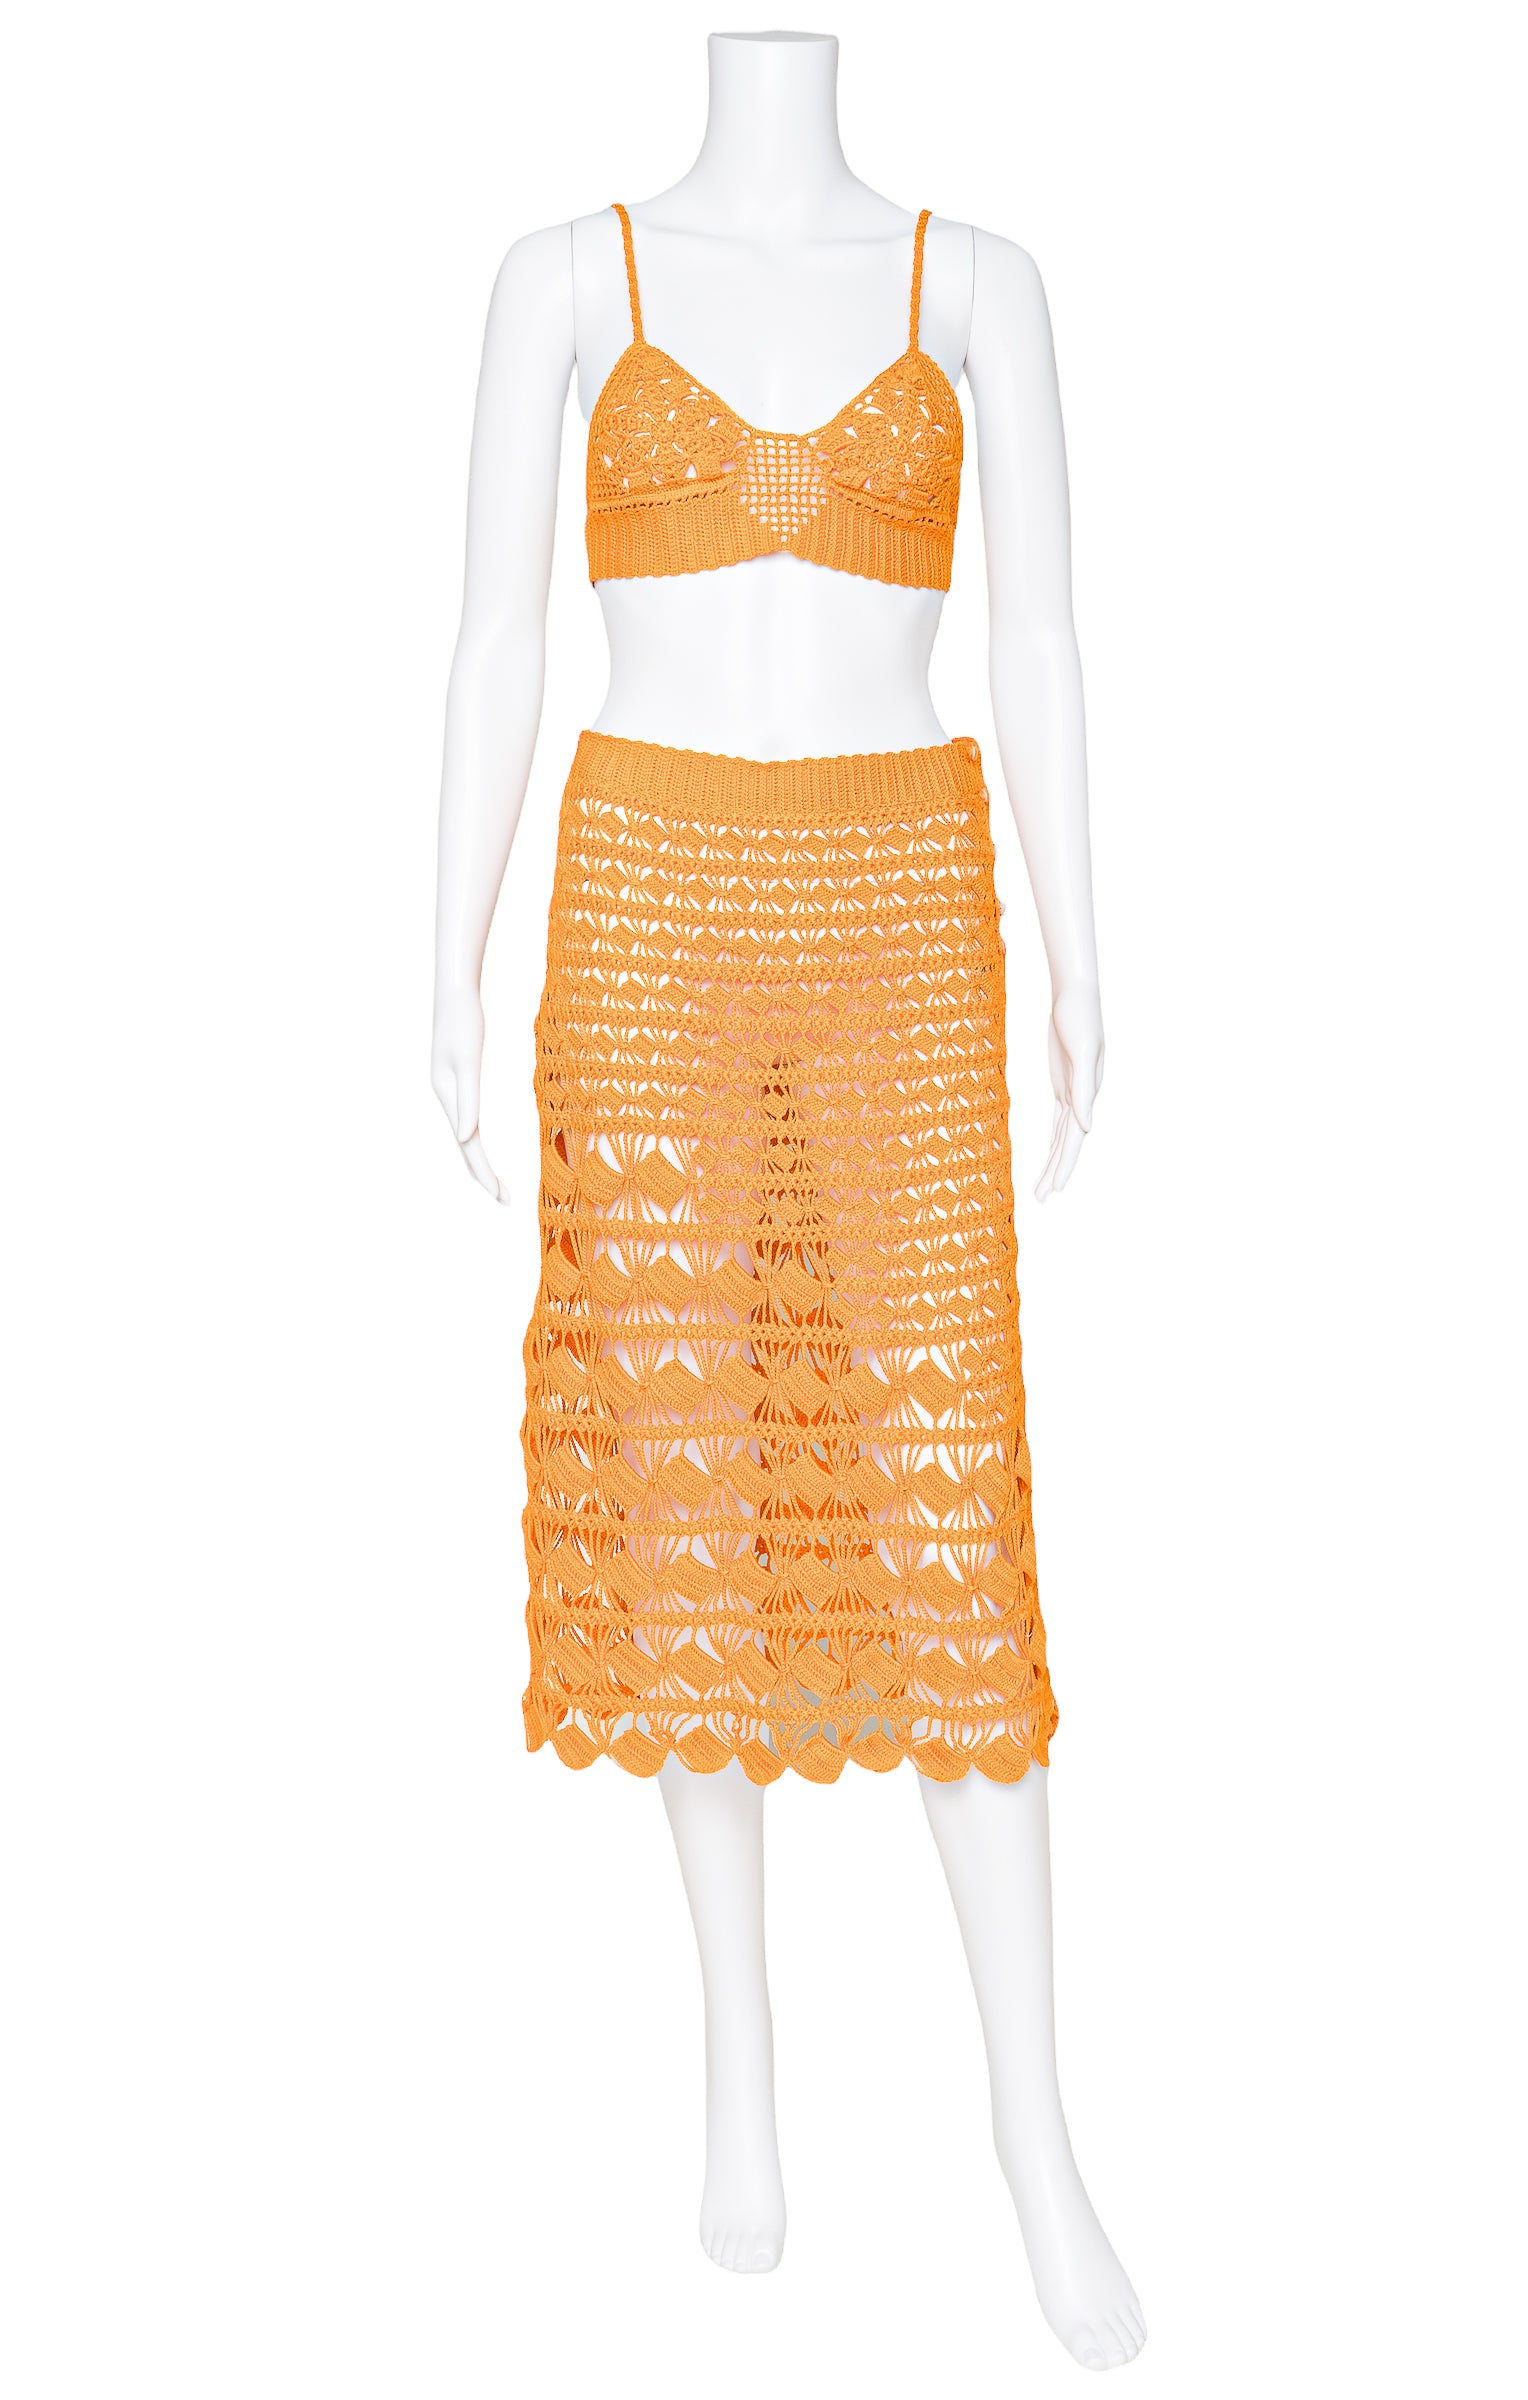 ACNE STUDIOS with tags Set Size: Top - S, Skirt - M